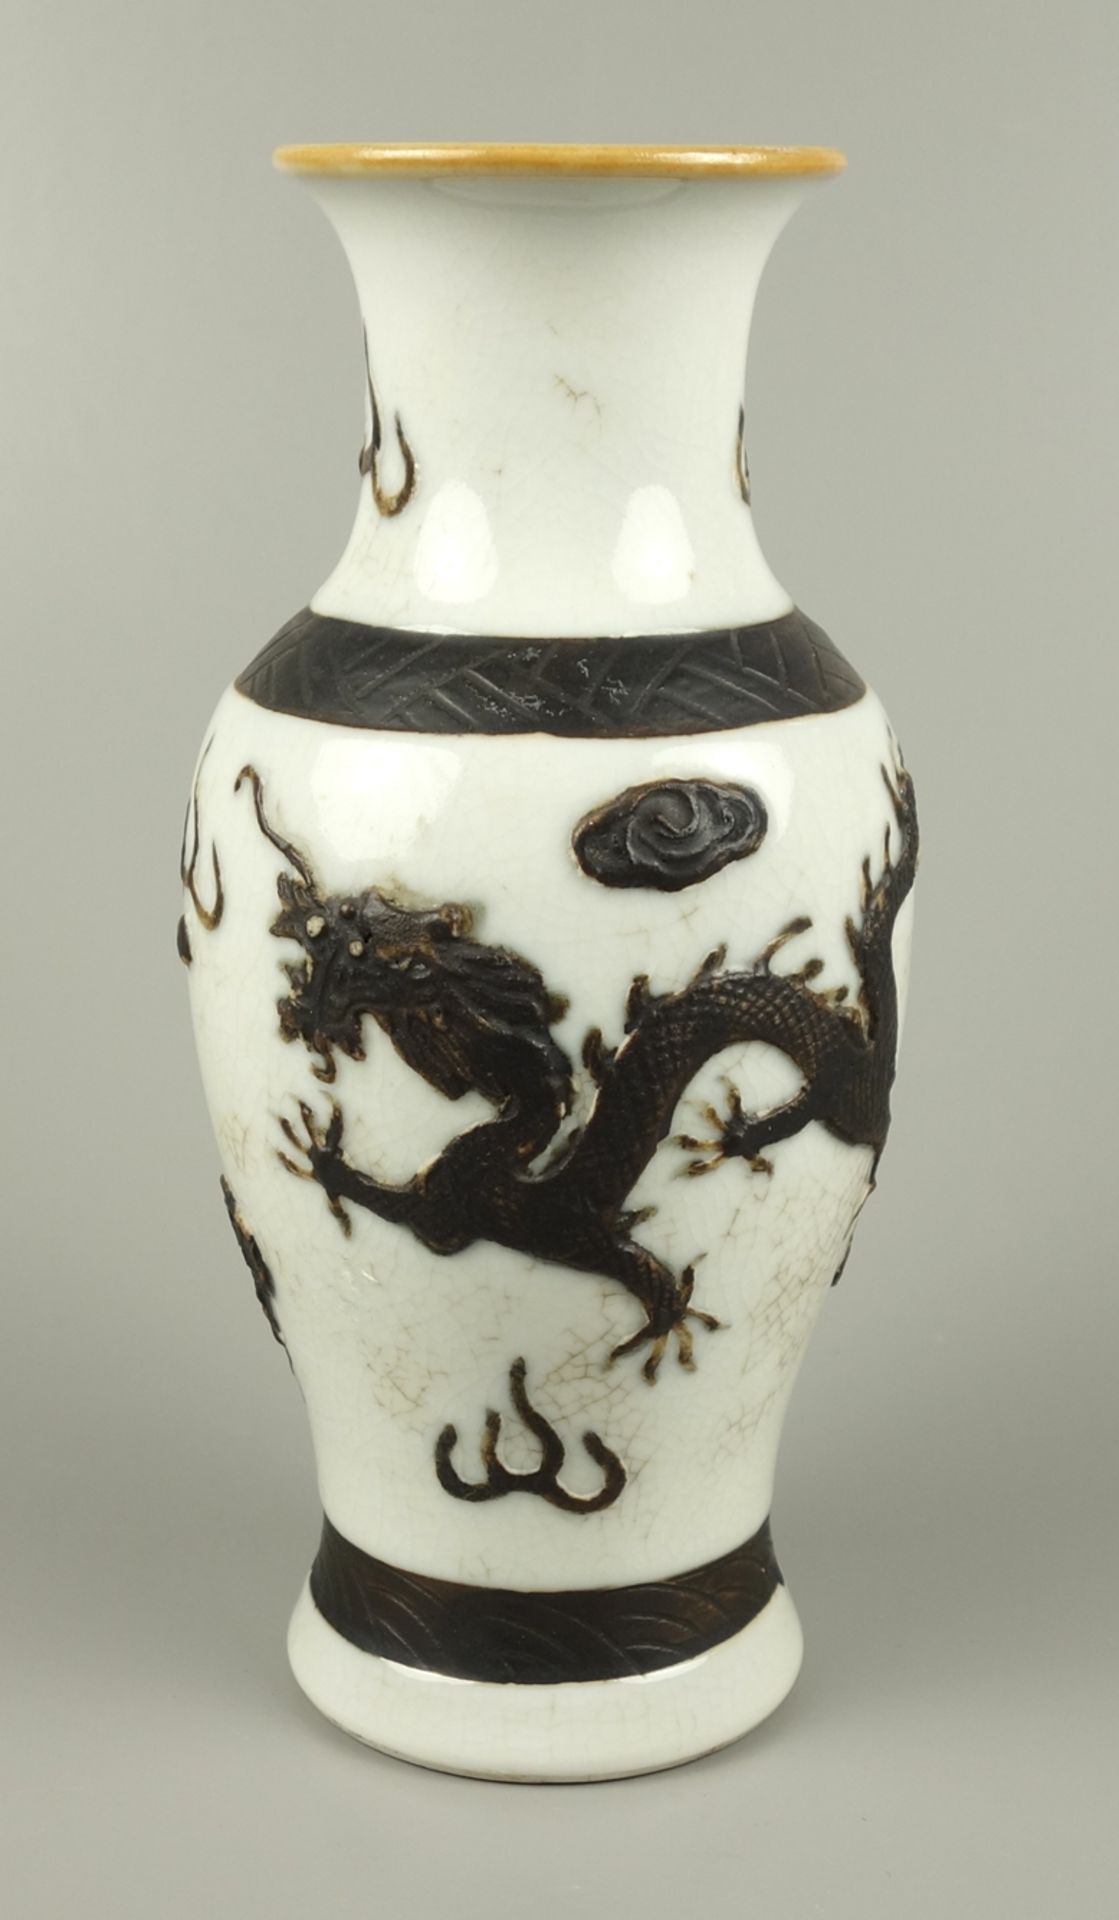 Vase with dragon relief, China, 19th cent.